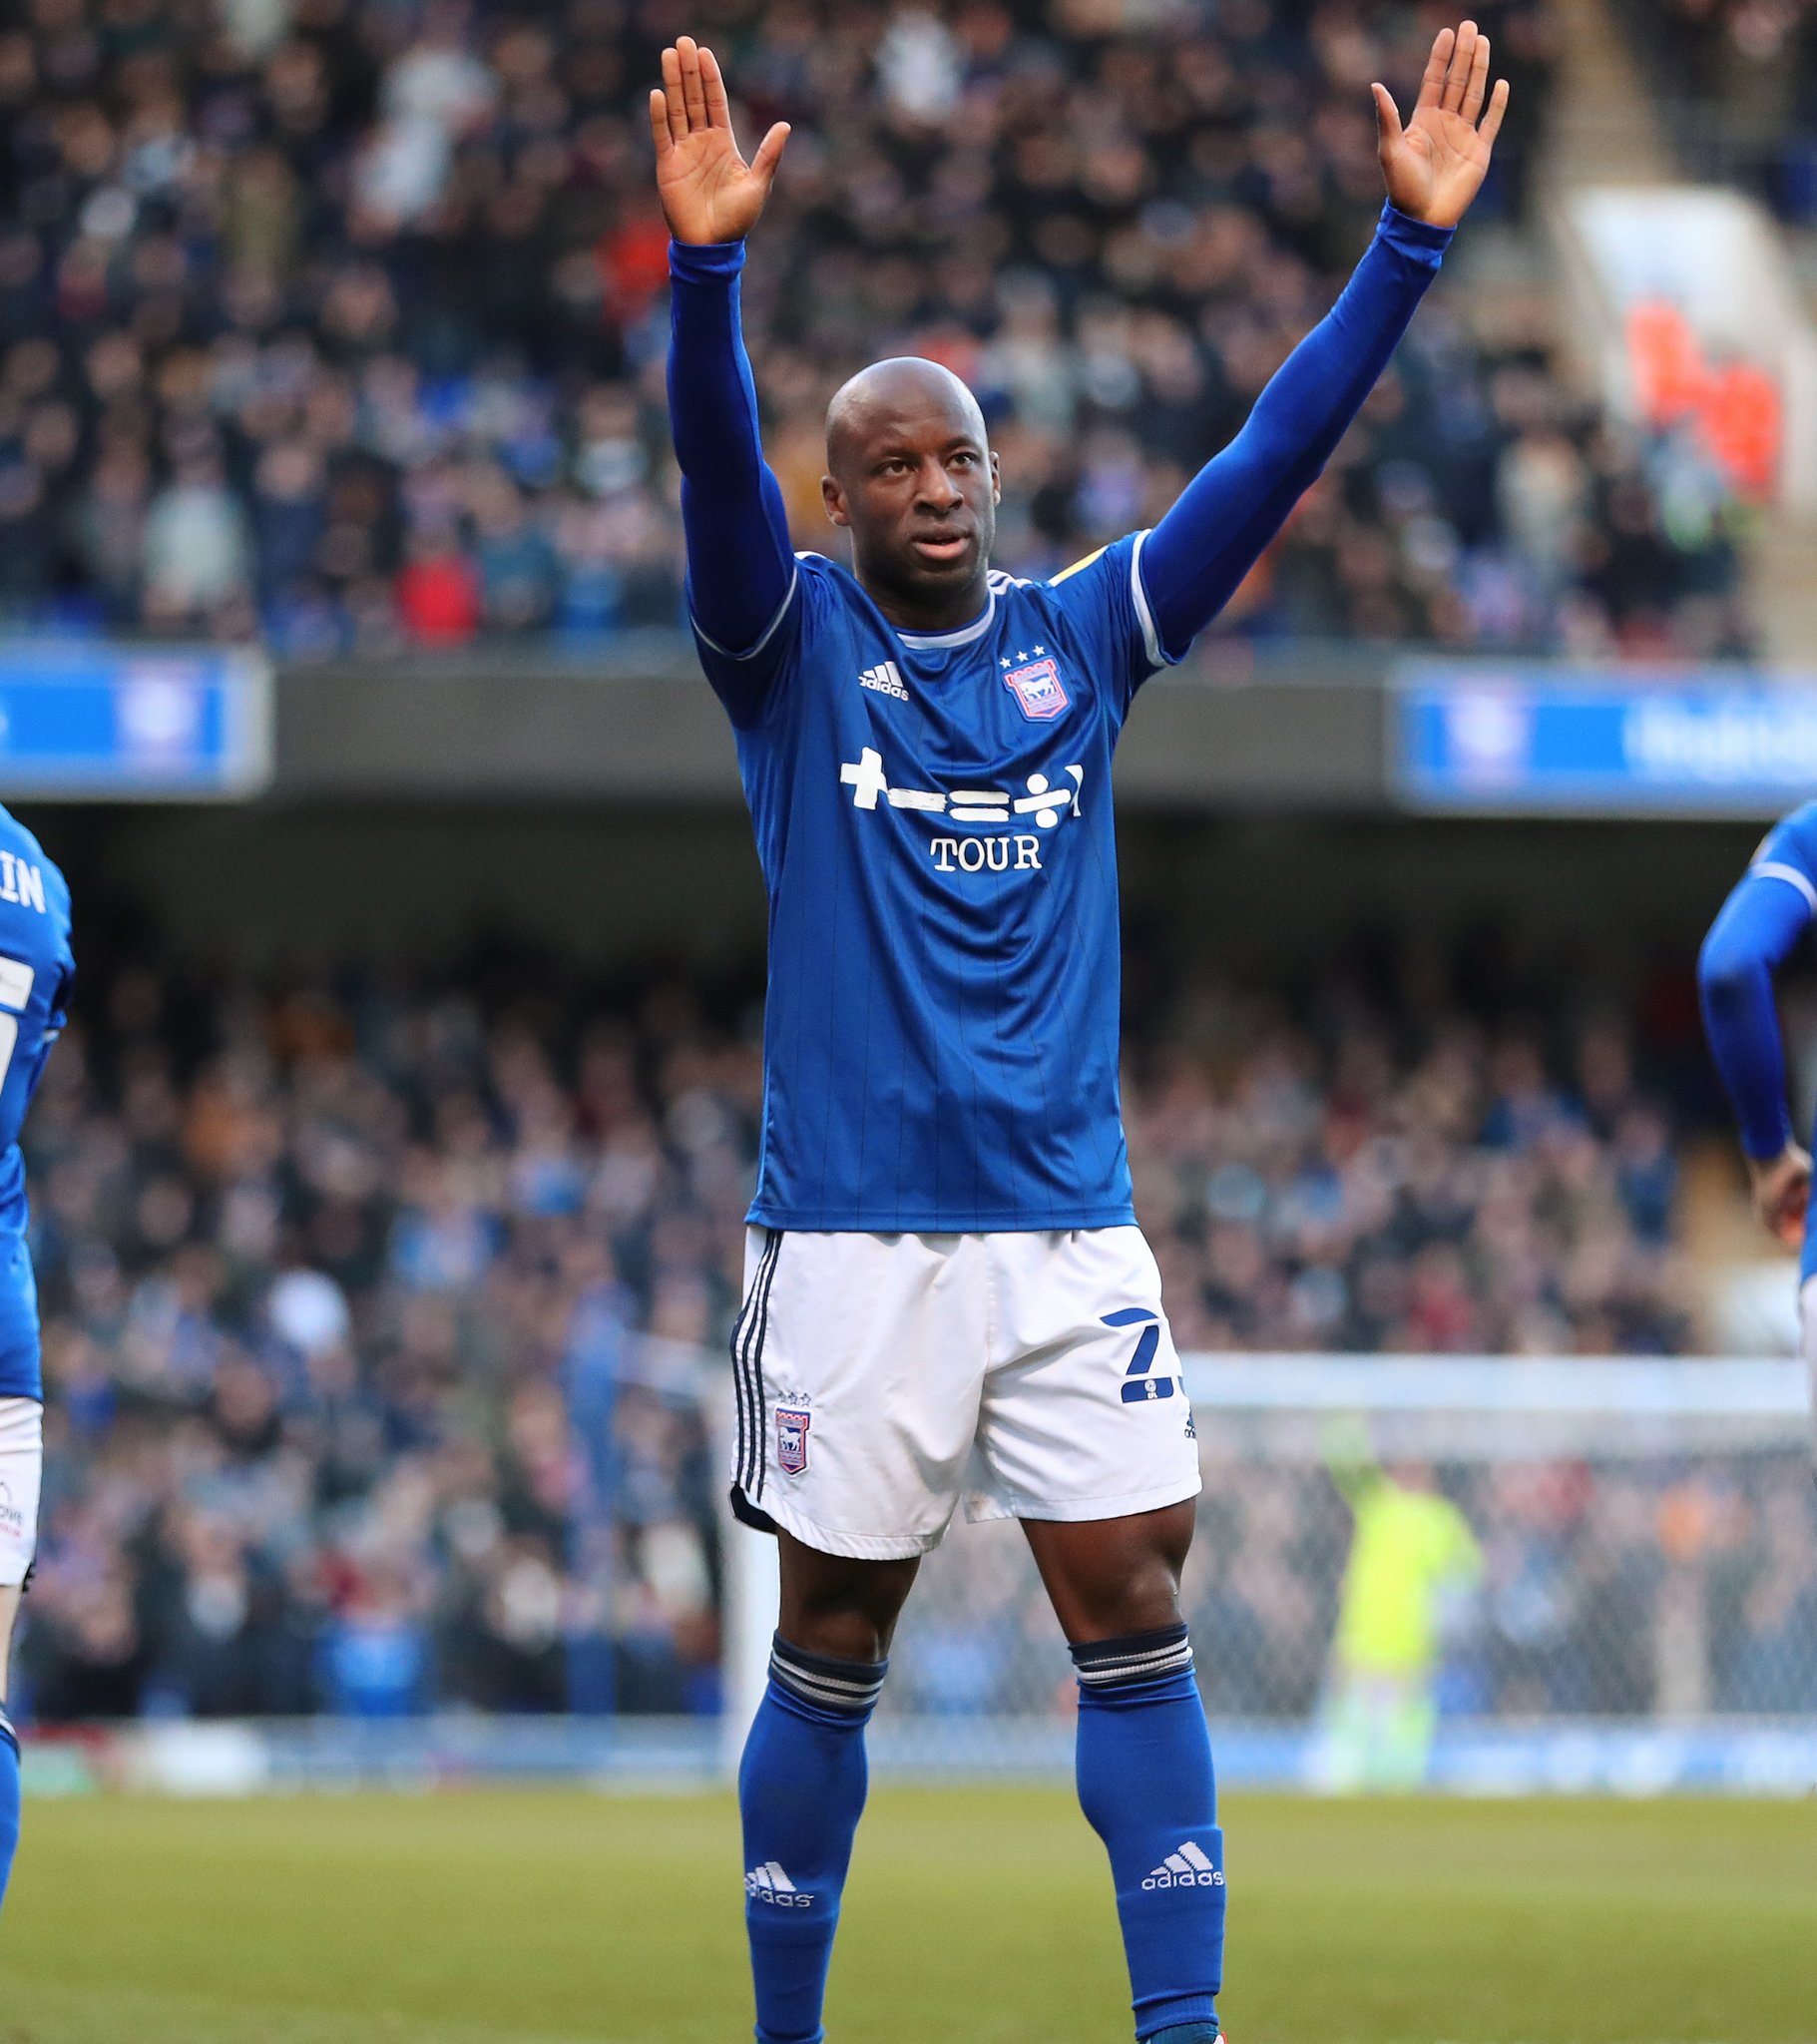  Wishing Sone Aluko a very happy 33rd birthday! How about three points to celebrate? 